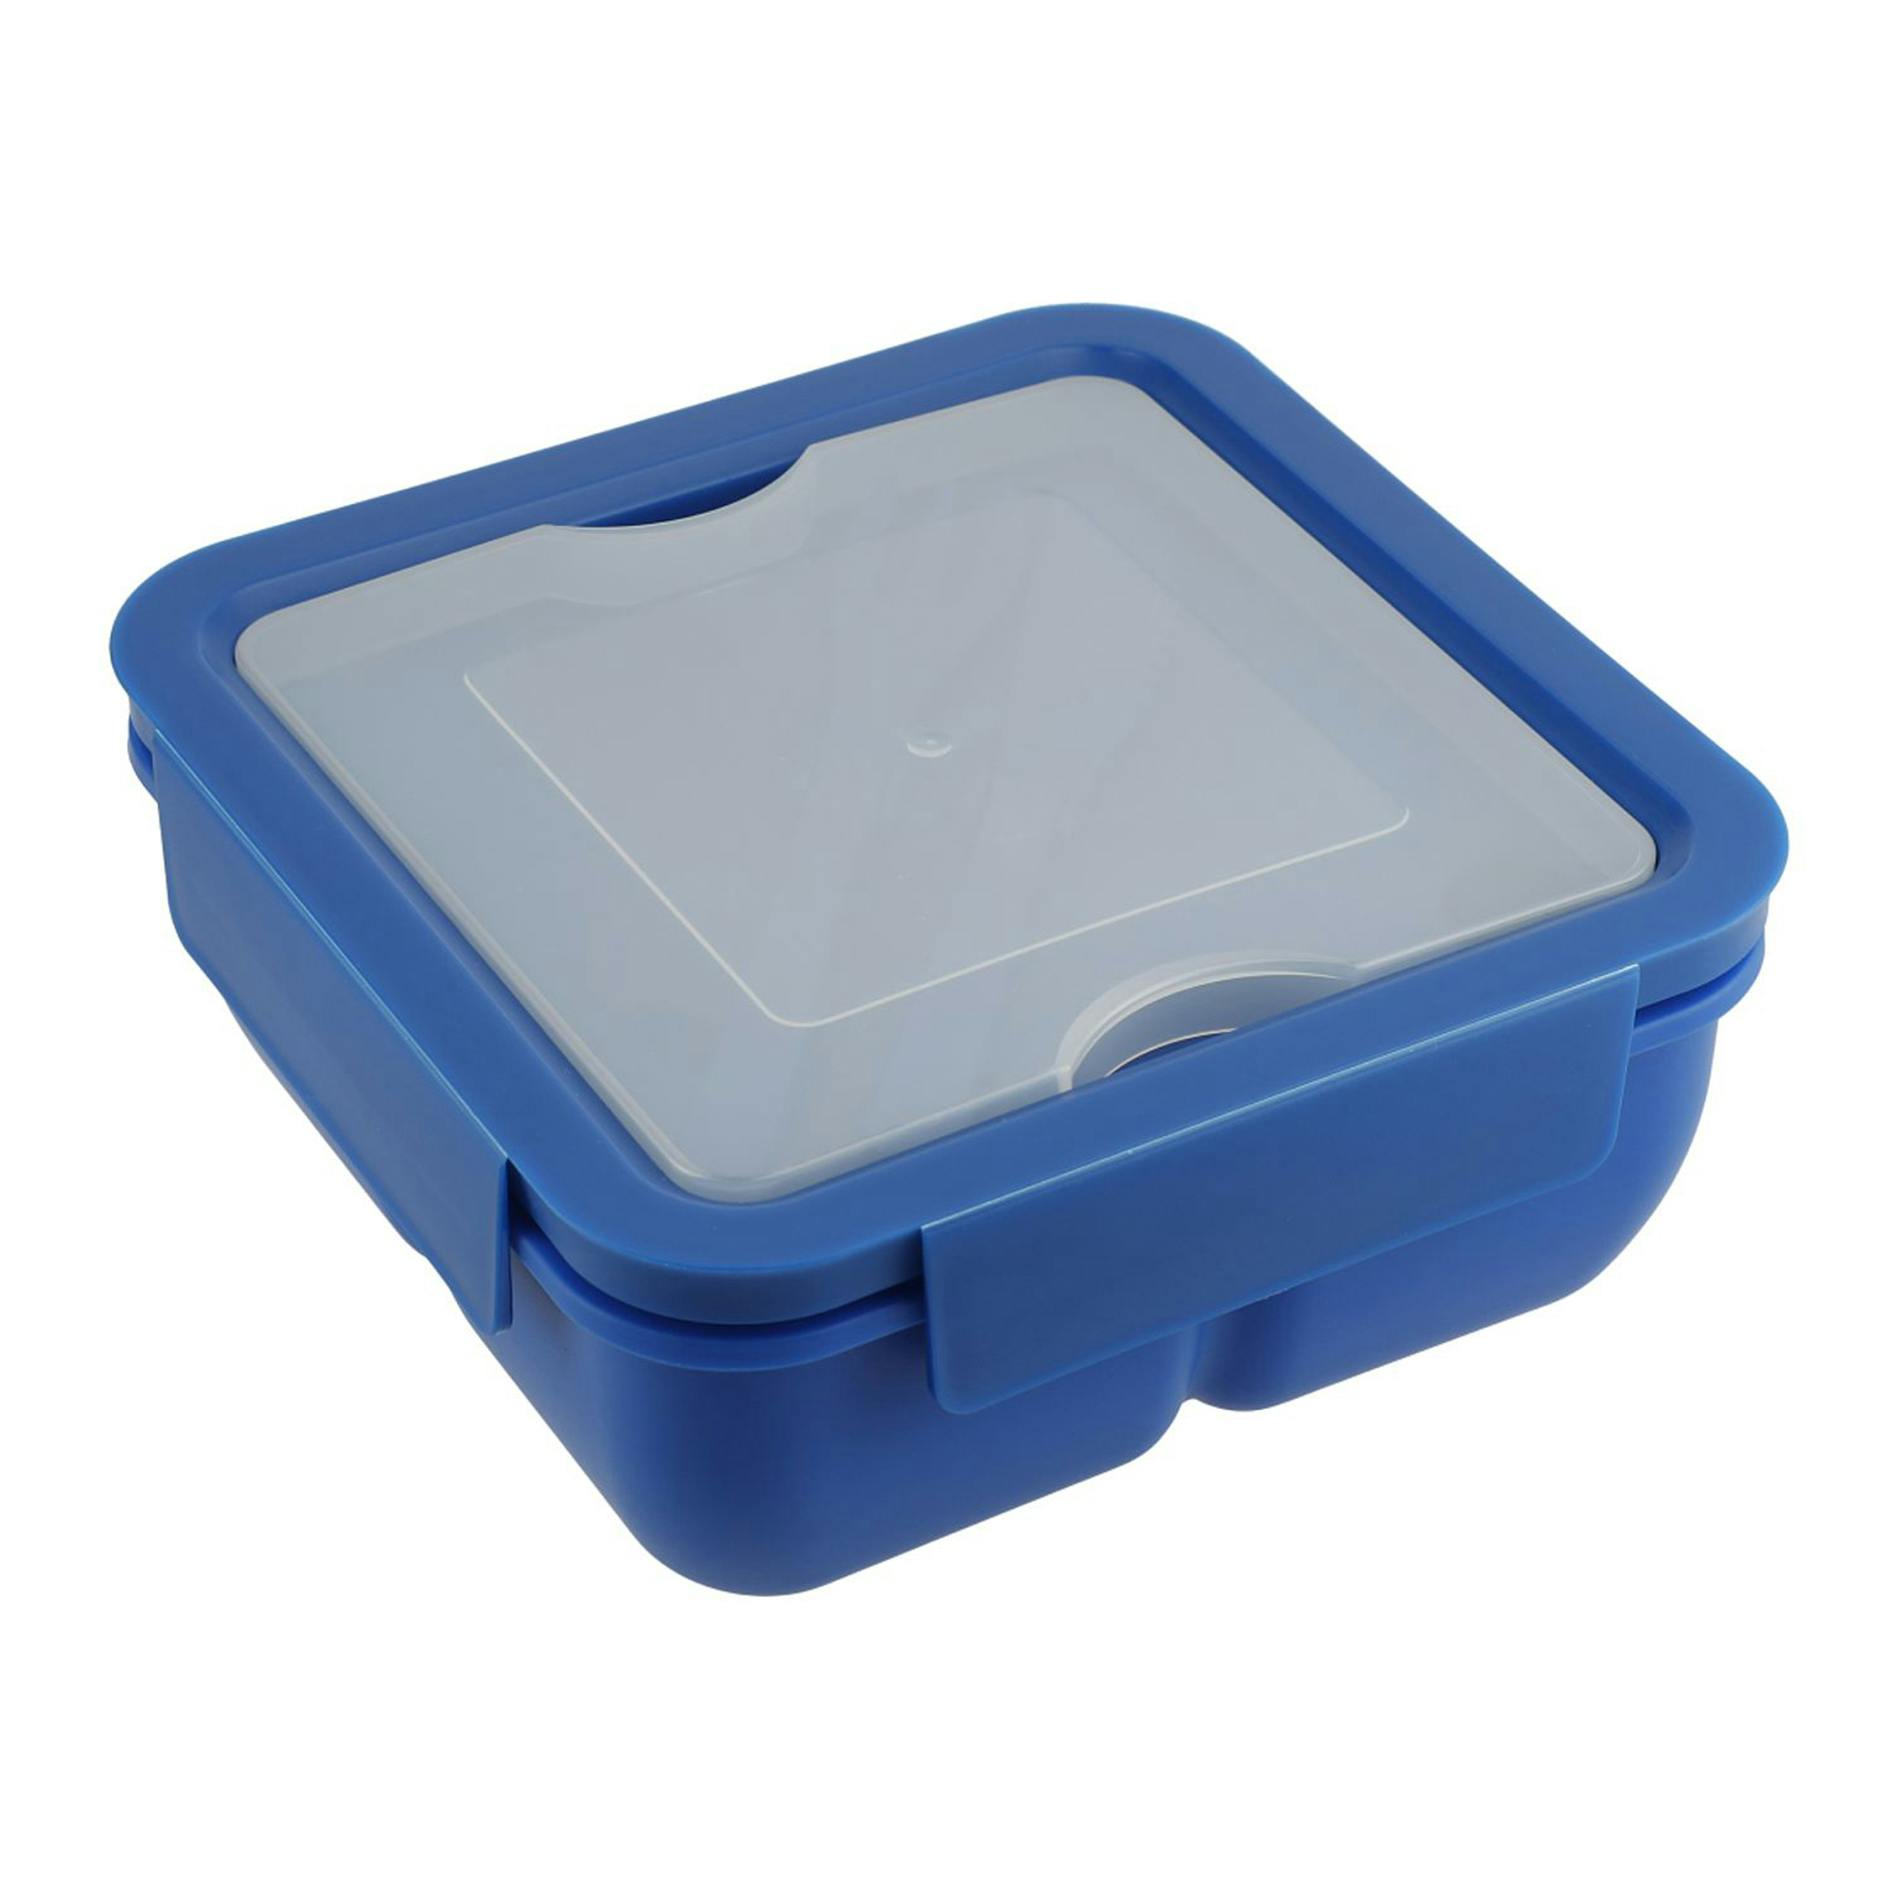 Recycled Plastic Lunch To Go Set - additional Image 4